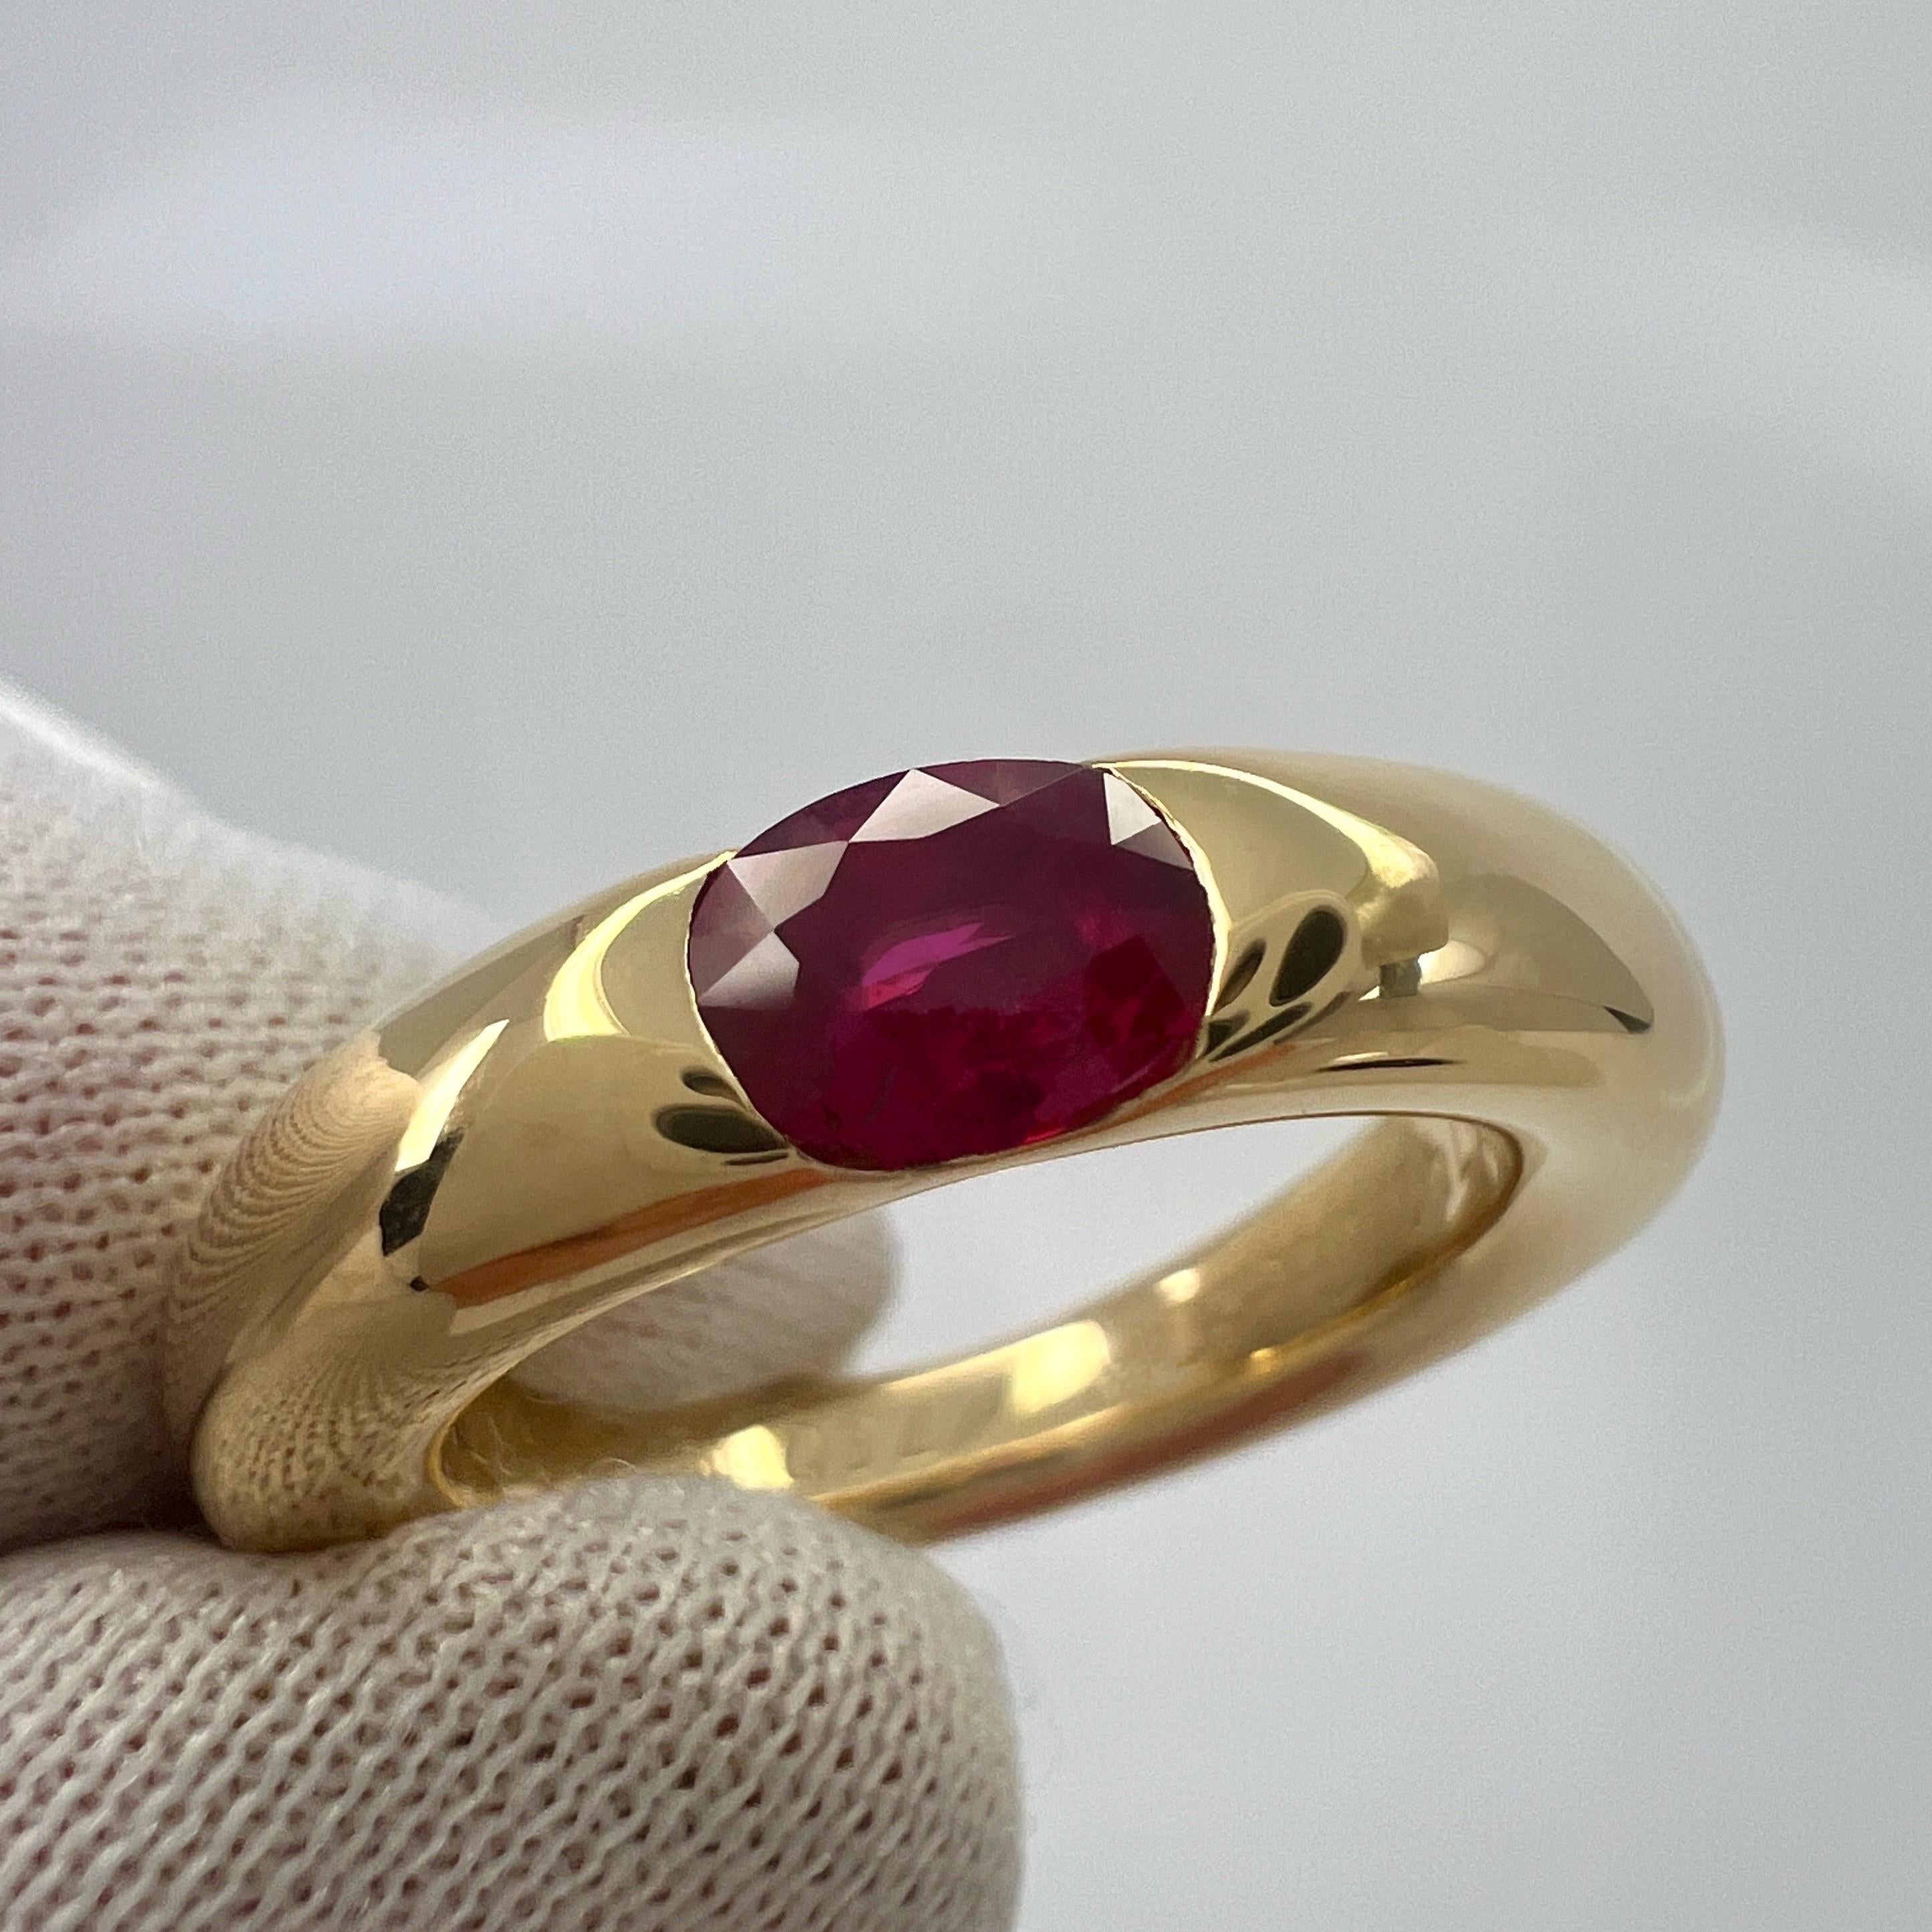 Vintage Cartier Vivid Red Ruby Ellipse 18k Yellow Gold Oval Cut Solitaire Ring 6